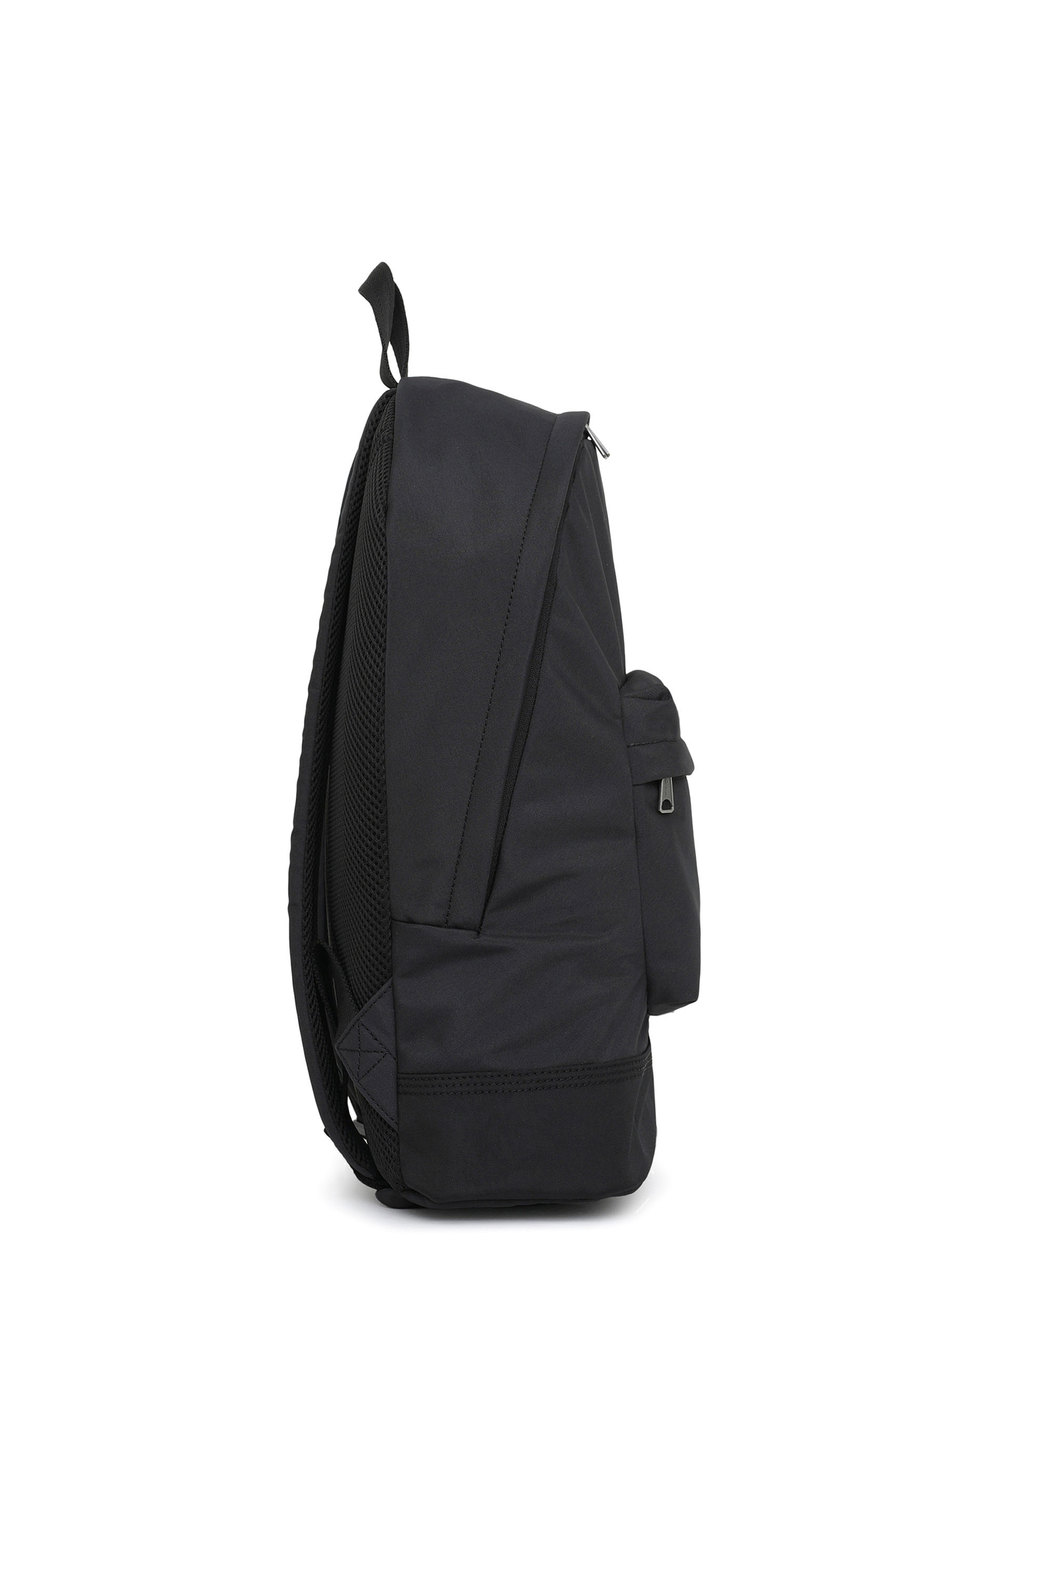 Backpack With D Patch